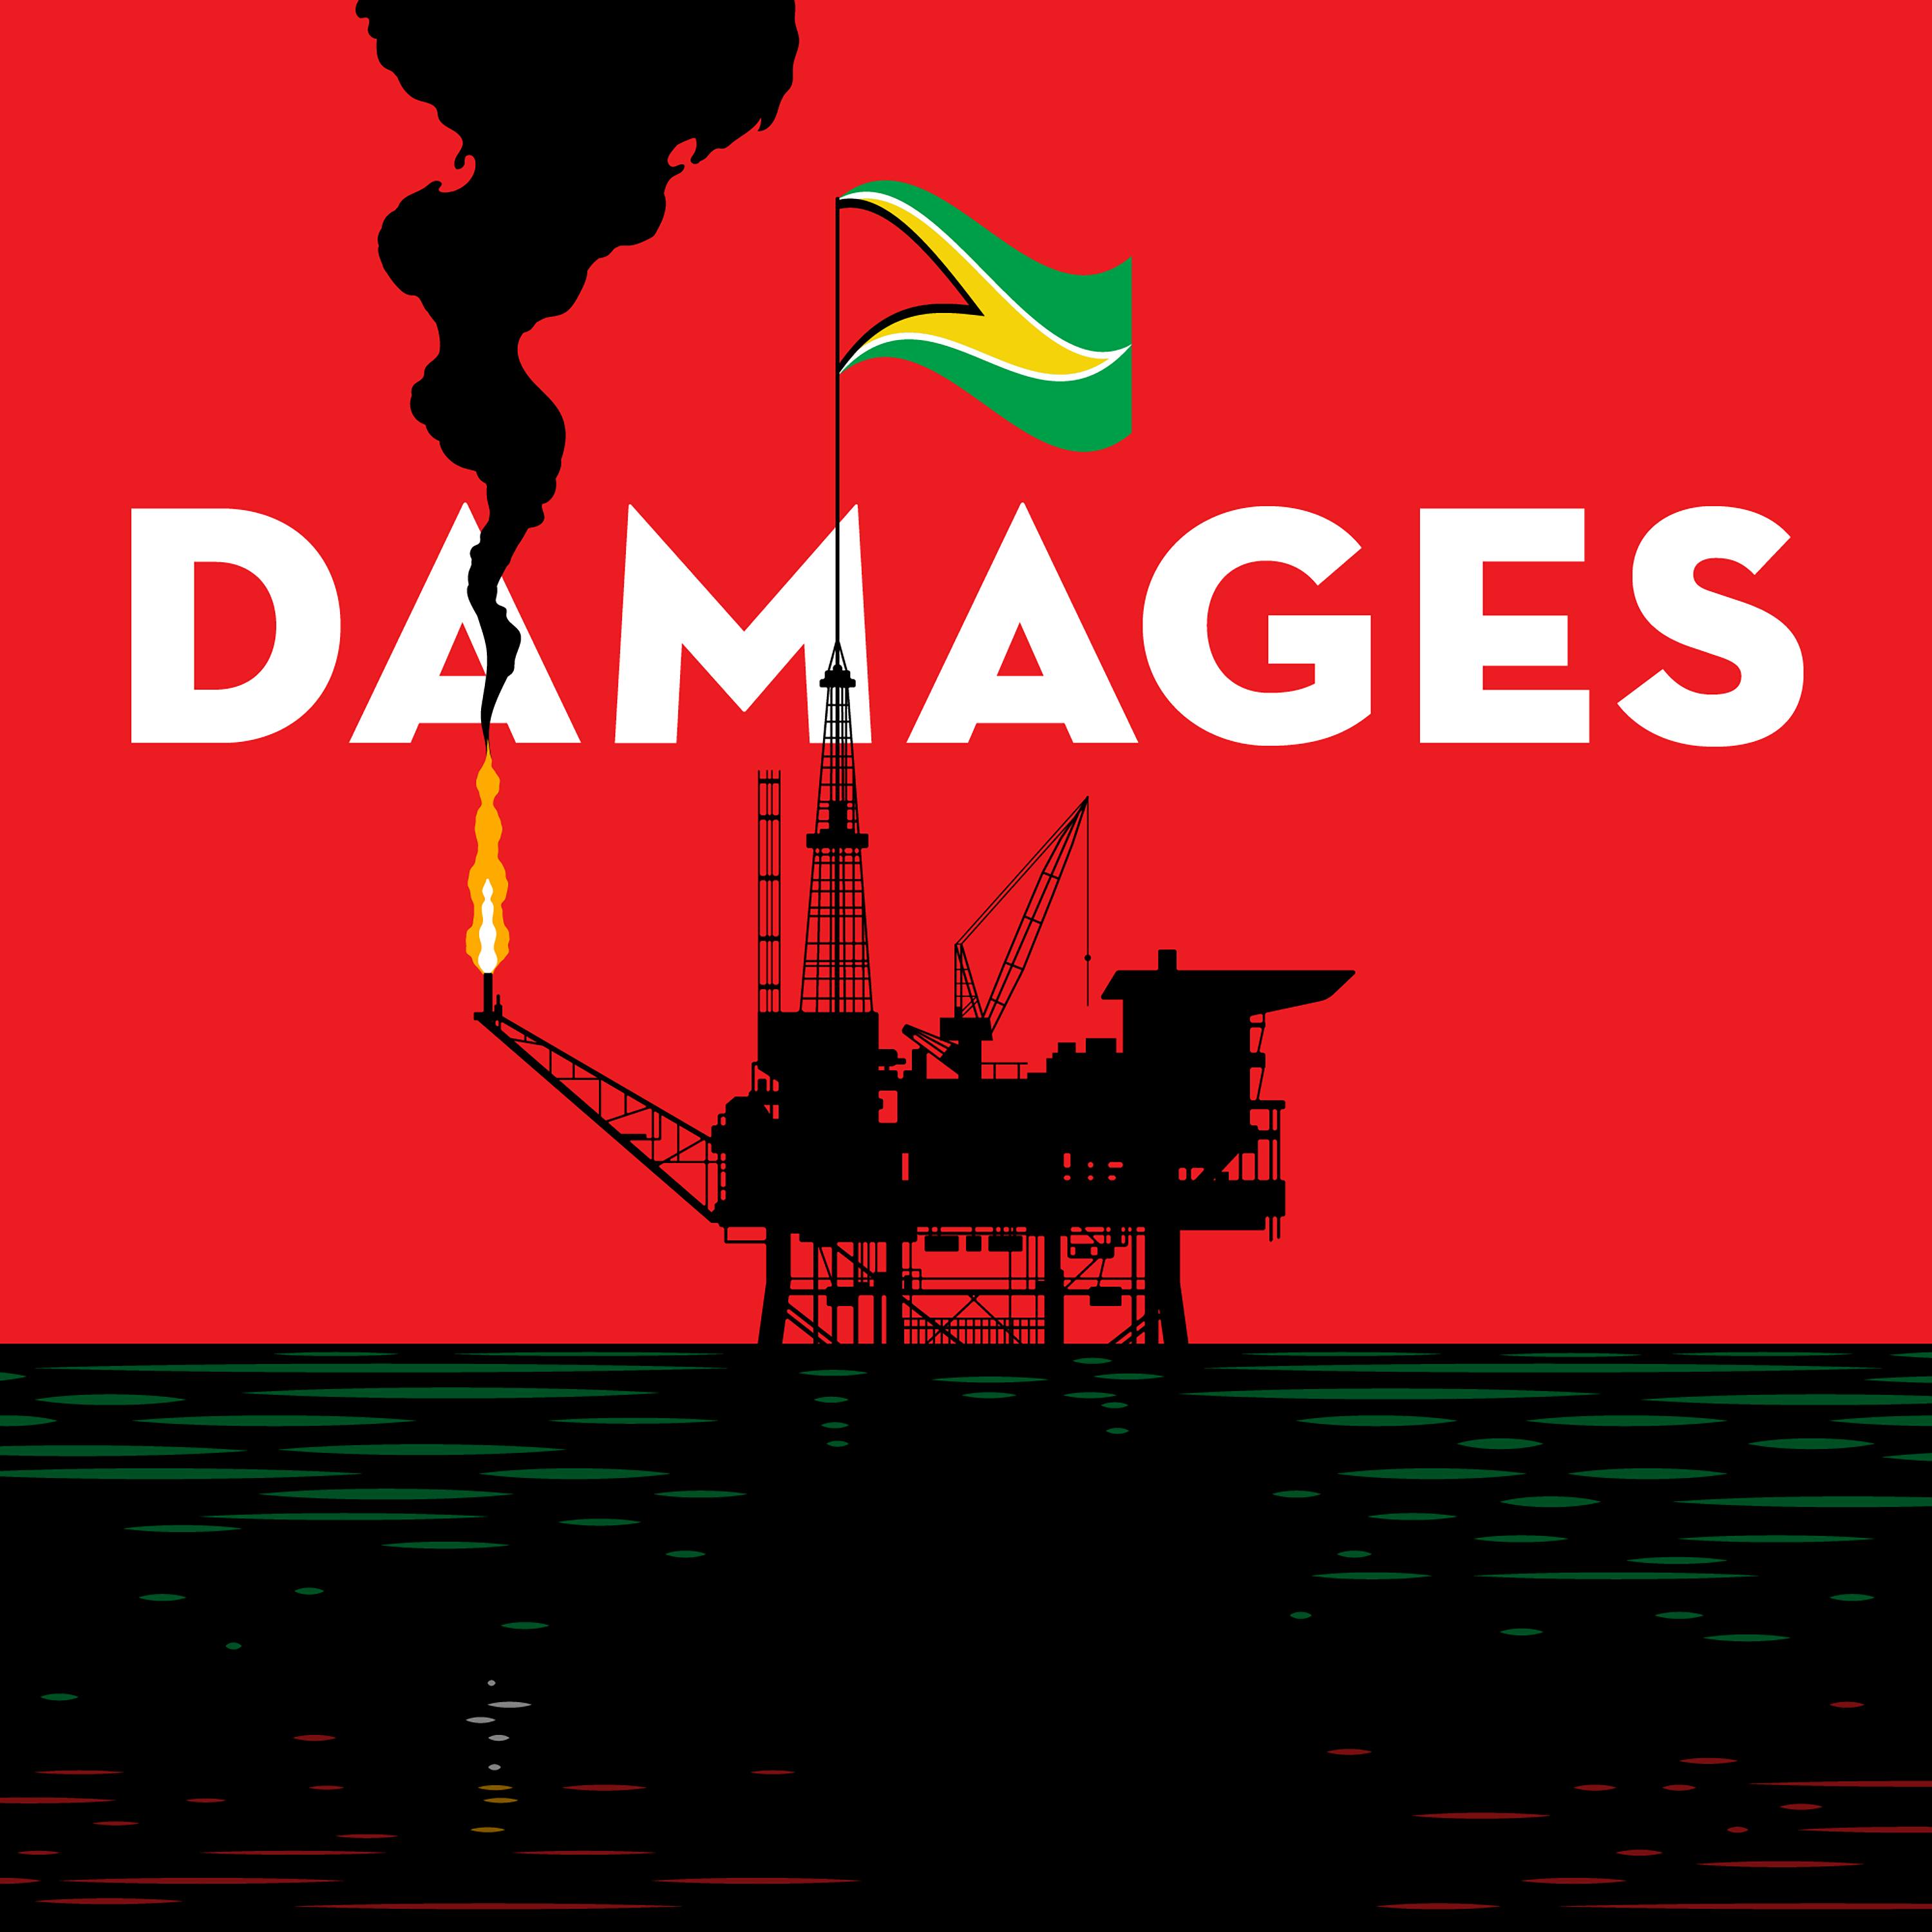 Guyana Update: Gas to Energy for Guyana, or Problem to Profit for Exxon?